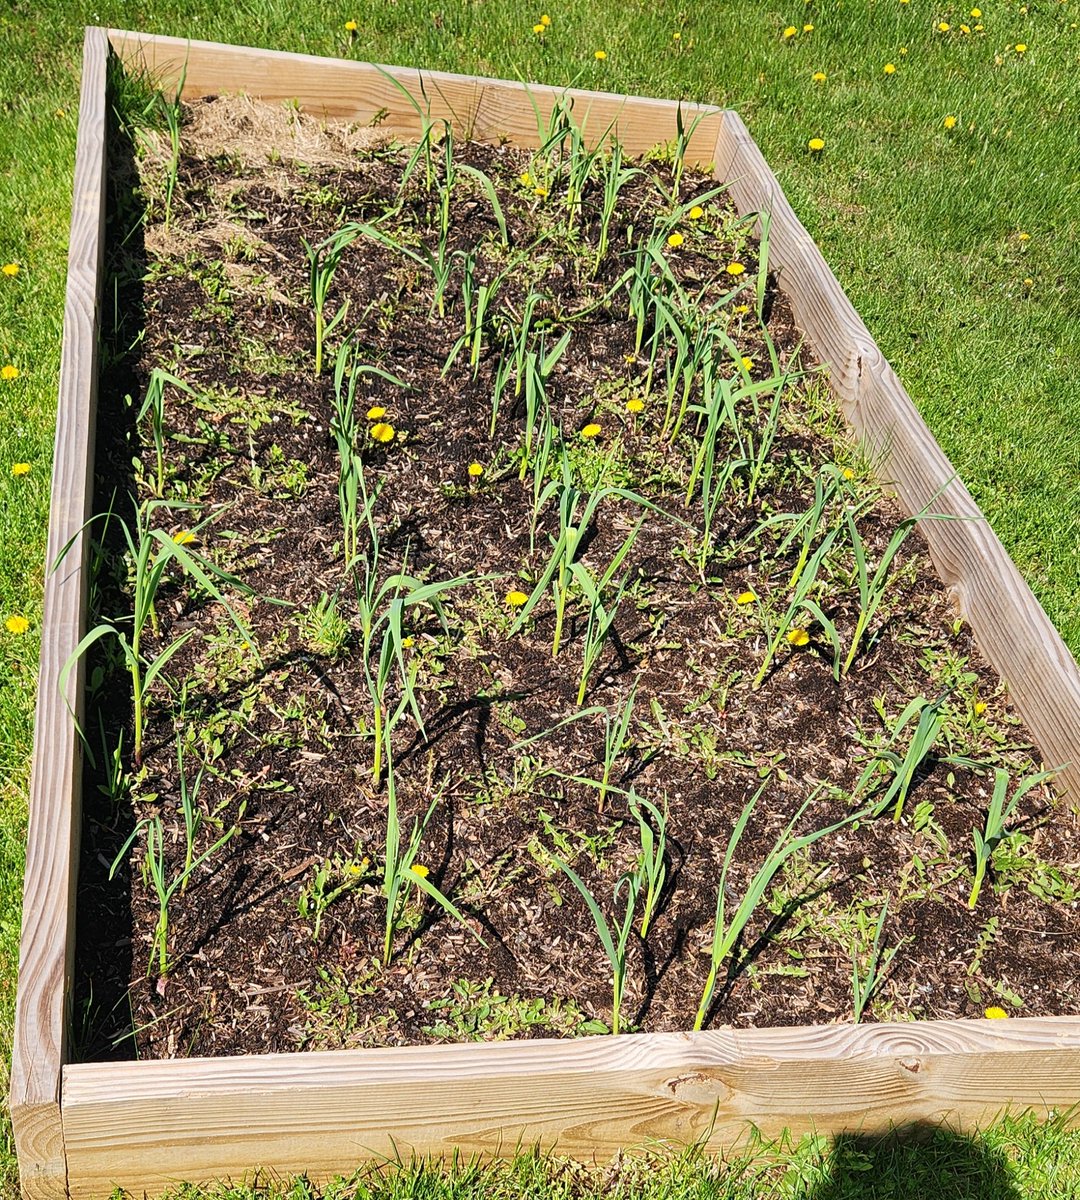 Growing garlic and dandelions #ourbmsa #oaiss